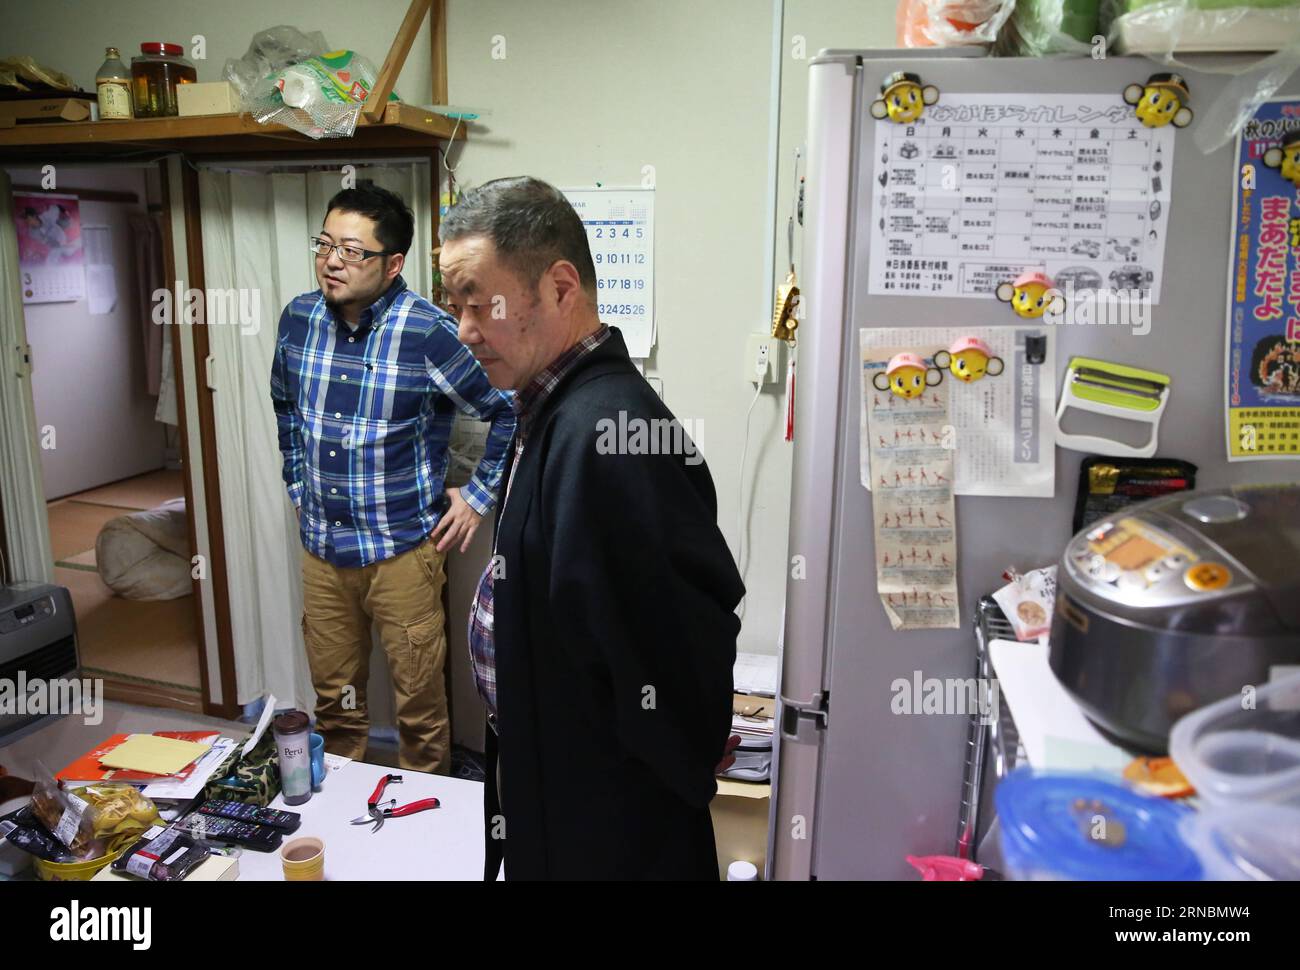 (160309)-- TOKYO, March 9, 2016-- A family of evacuees receives interview at a temporary house for evacuees of the earthquake of March 11, 2011 in Iwate, Japan, on March 5, 2016. As the five-year intensive reconstruction period approaches its deadline in late March, the Japanese Tohoku region devastated by a monstrous earthquake-triggered tsunami on March 11, 2011 is still struggling to be revitalized, with a declining population making the huge projects ever harder to complete. )(azp) JAPAN-EARTHQUAKE-TEMPORARY HOUSES LiuxTian PUBLICATIONxNOTxINxCHN   Tokyo March 9 2016 a Family of Evacuees r Stock Photo